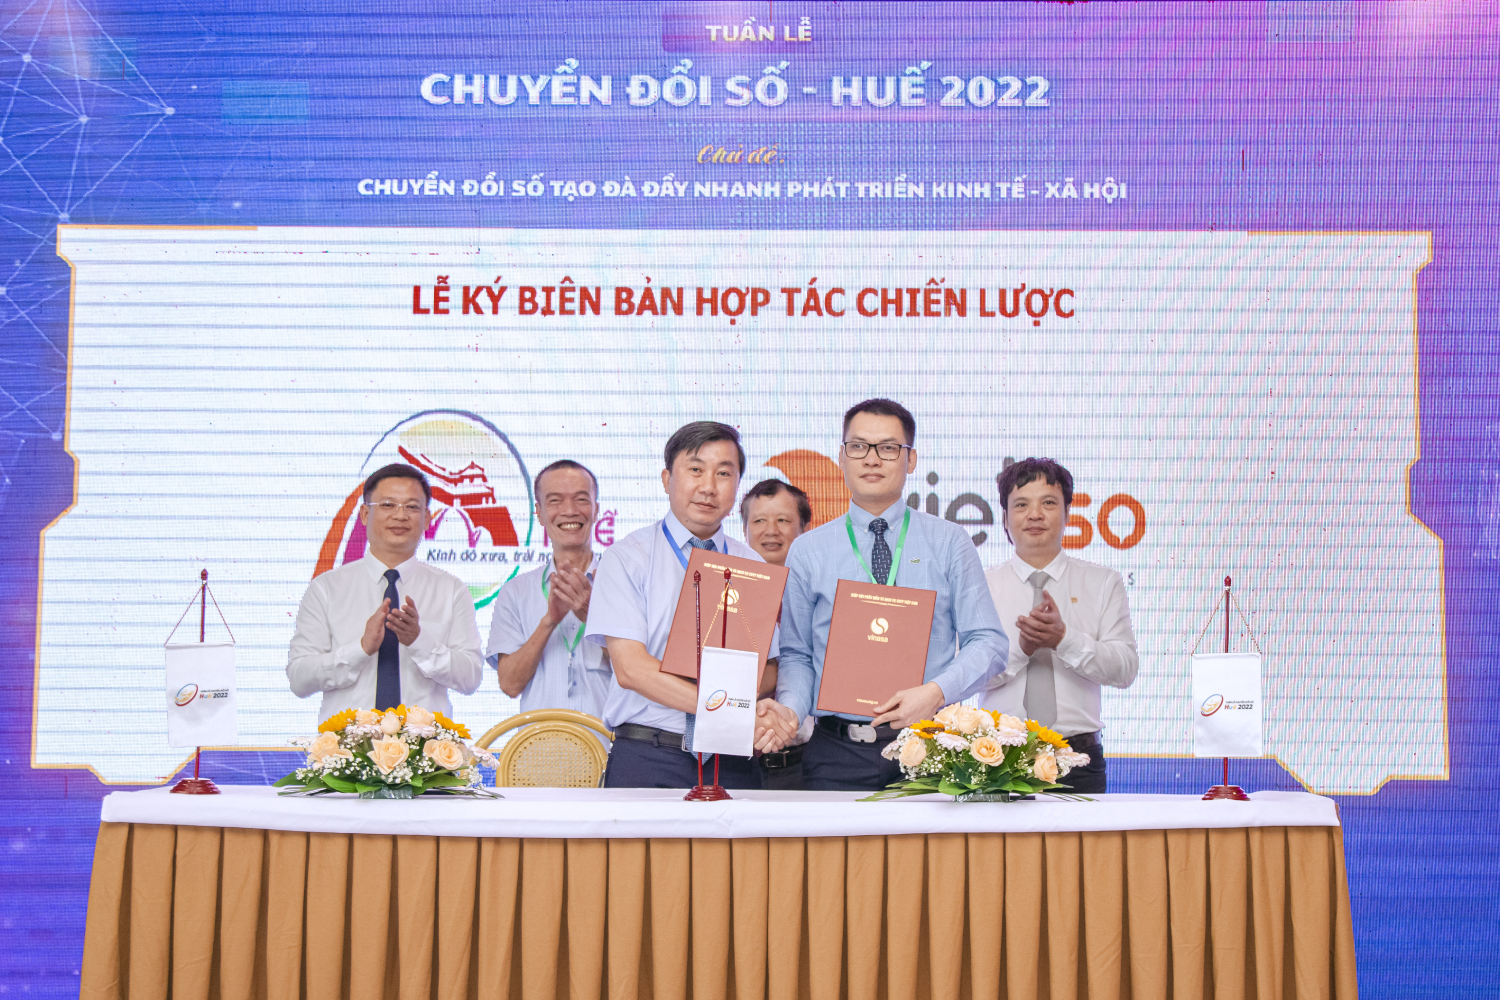 Mr. Nguyen Van Phuc - Director of the Department of Tourism of Thua Thien Hue province (left) and Mr. Nguyen Quyet - Chairman of the Board of Directors of VietISO Joint Stock Company (right) signed a cooperation agreement on digital transformation of Thua Thien Hue tourism in the period 2022 - 2025